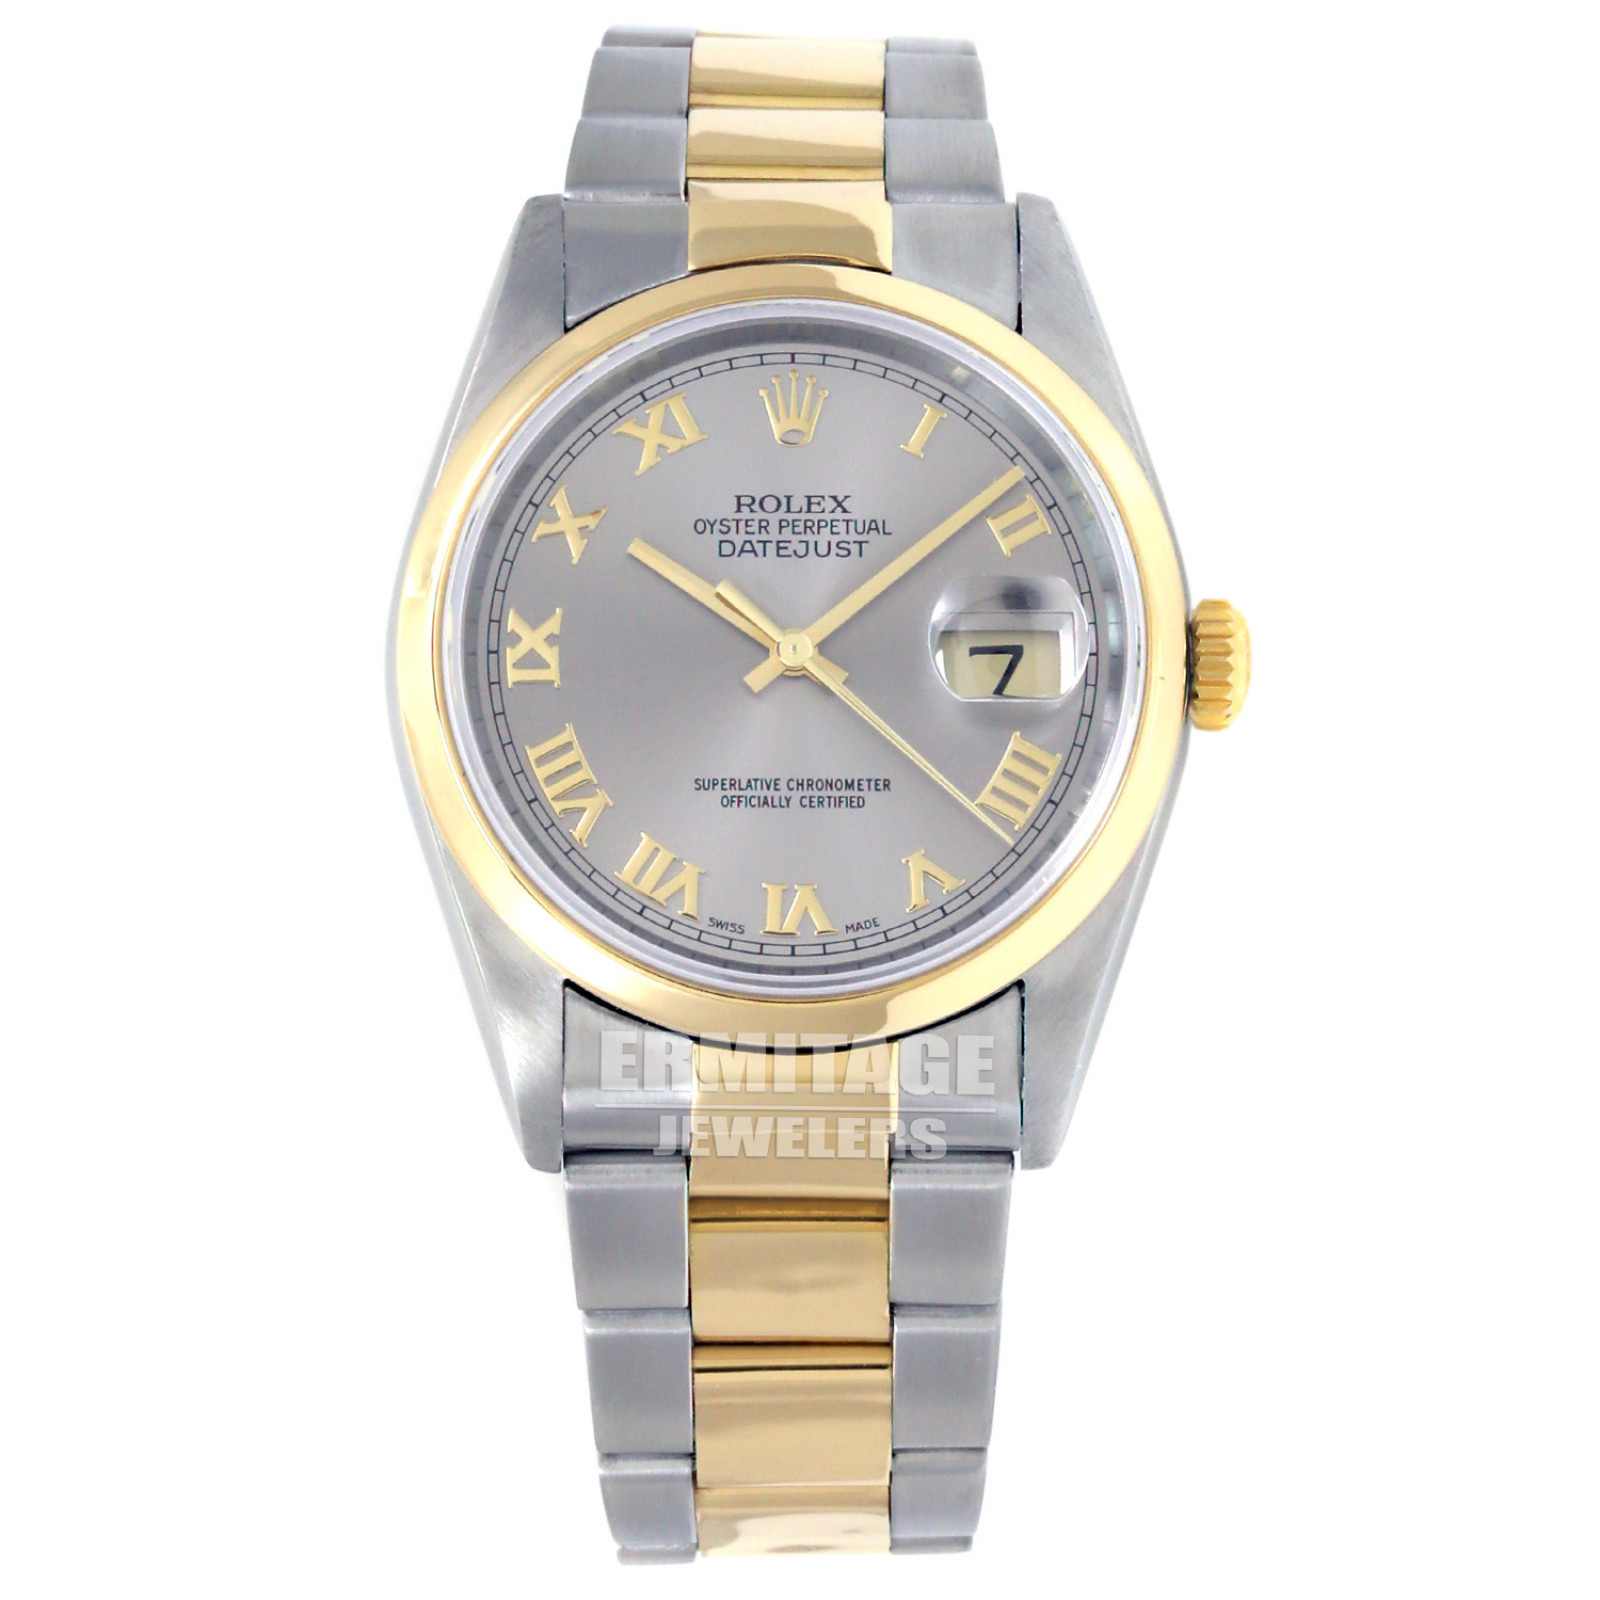 Sell Rolex Datejust 16203 with Steel Dial